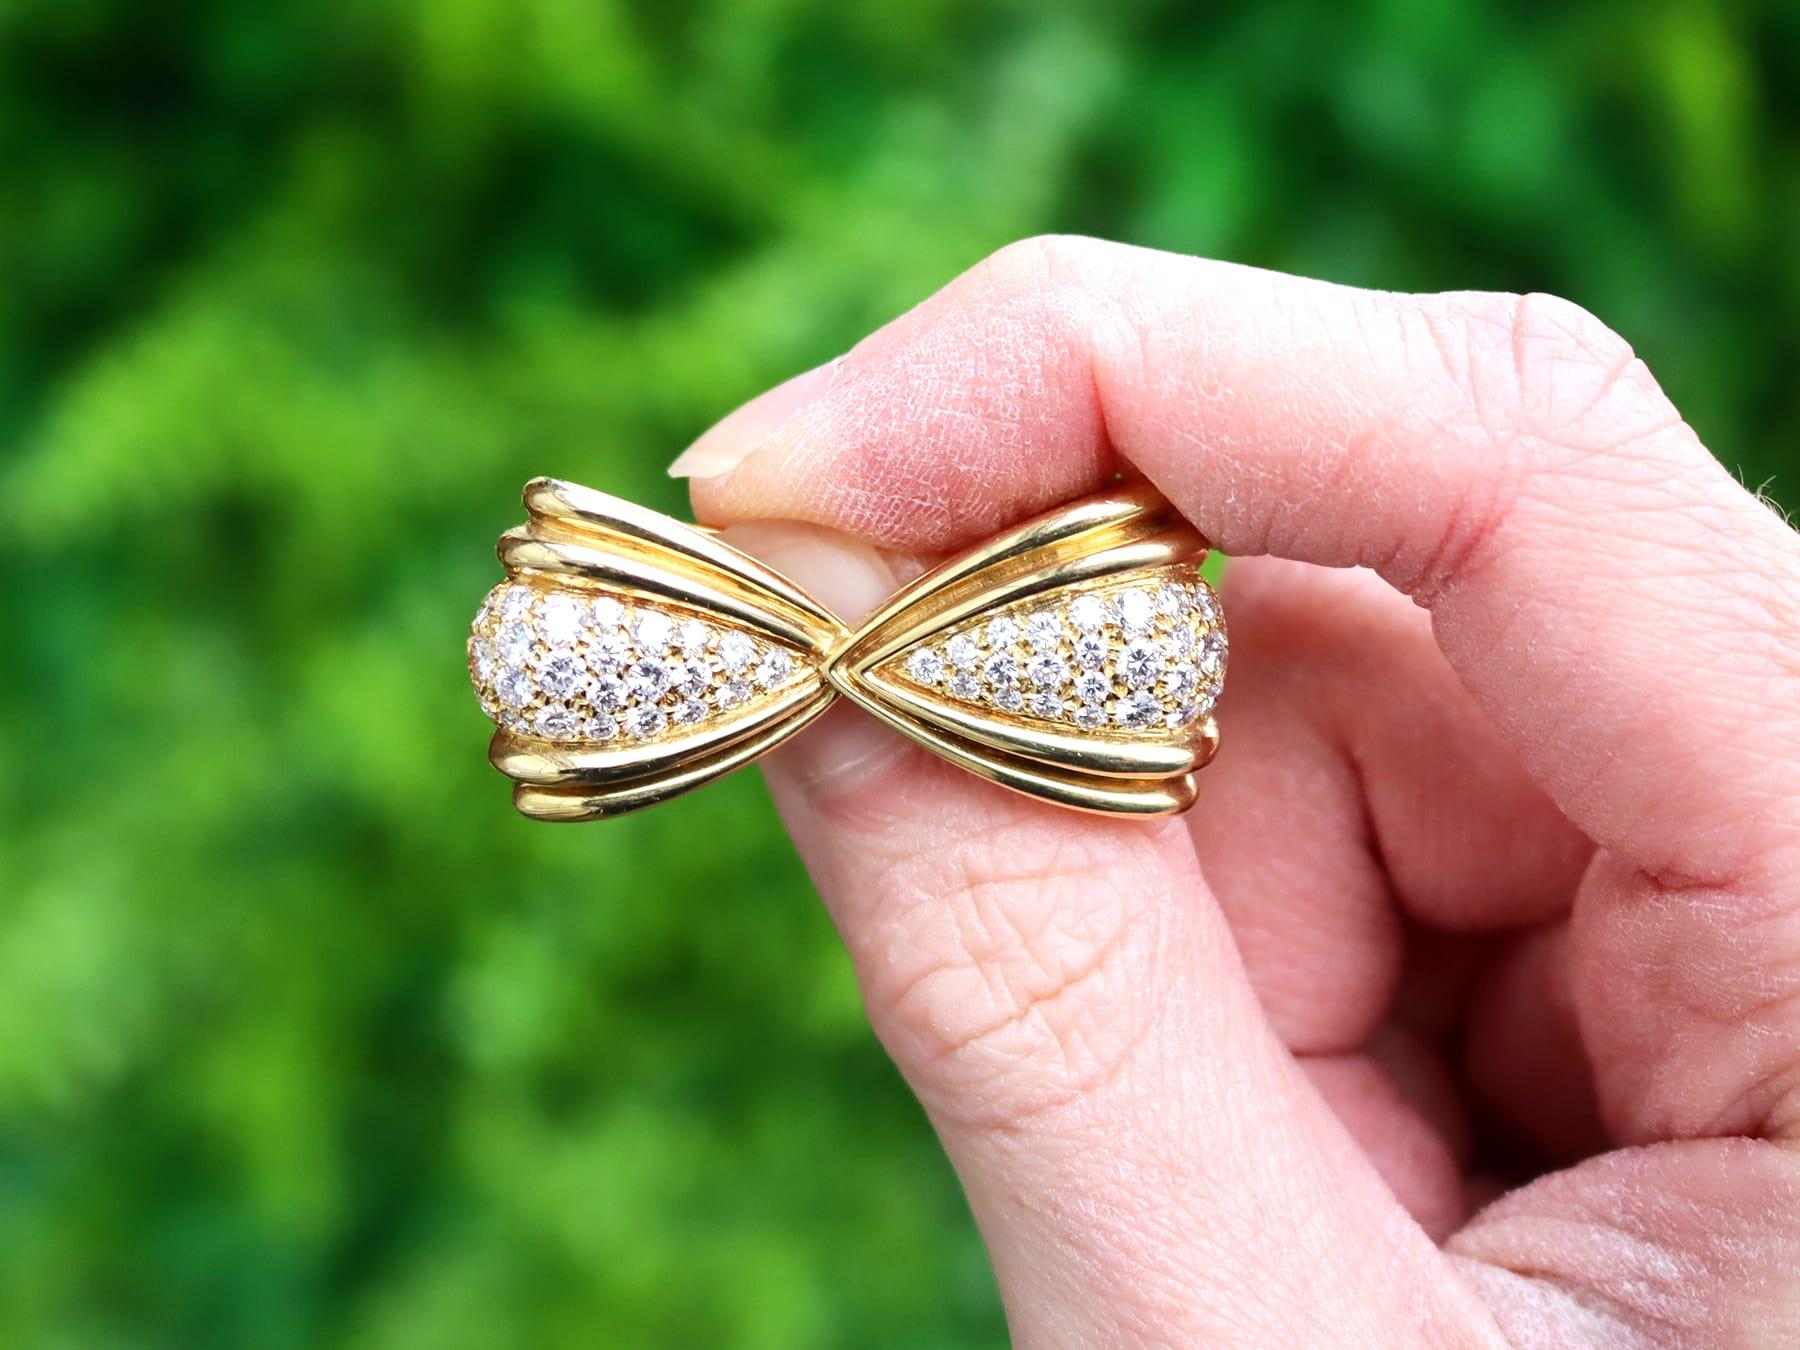 An impressive vintage 1.68 carat diamond and 18 karat yellow gold bow brooch; part of our diverse vintage jewelry and estate jewelry collections.

This fine and impressive vintage bow brooch with diamonds has been crafted in 18k yellow gold.

The